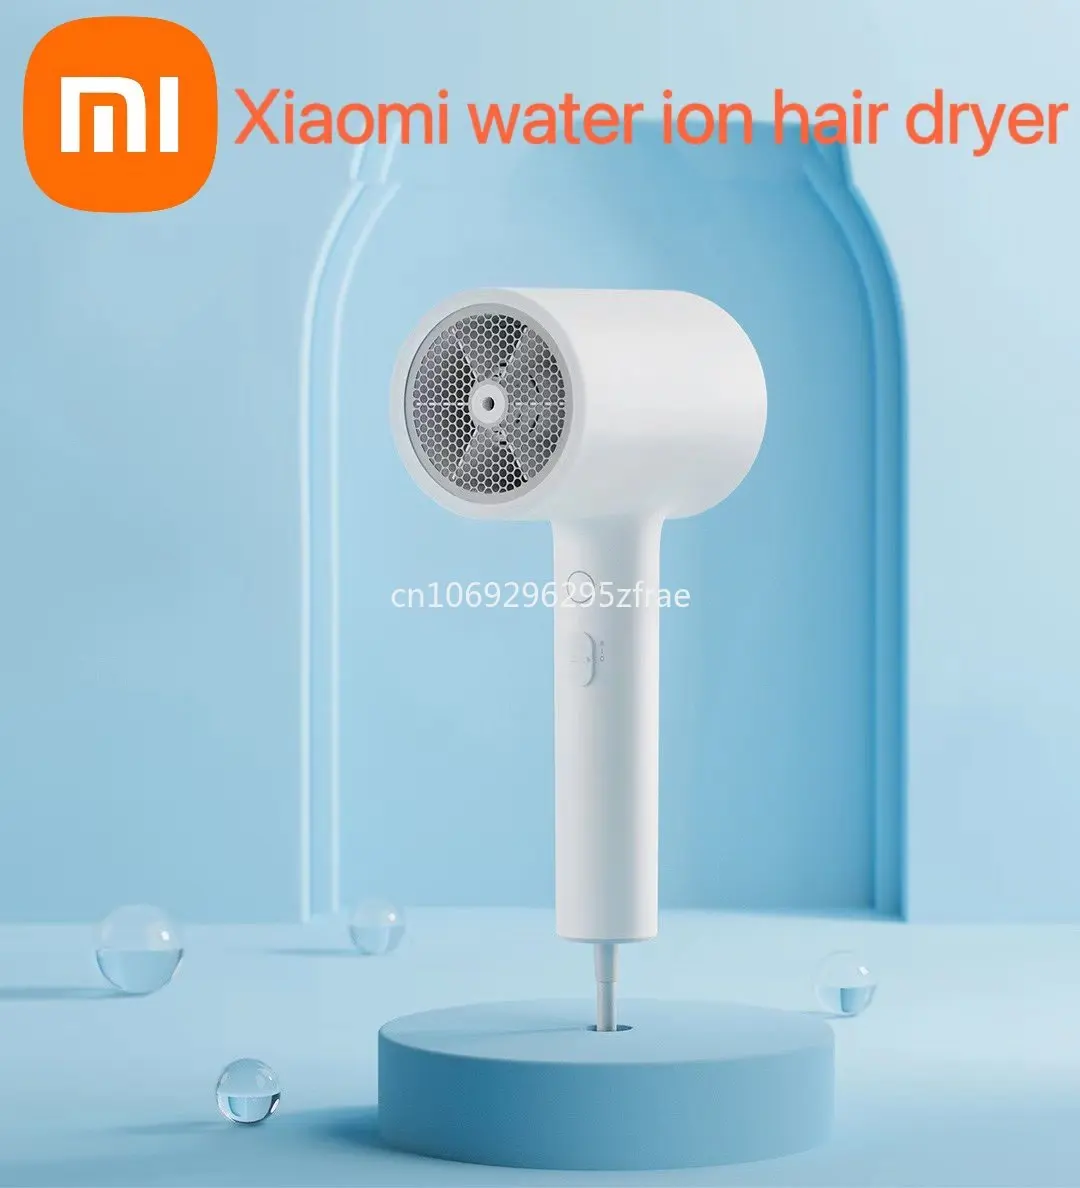 100% genuine Xiaomi Mijia water ion hair dryer, NTC intelligent temperature control cooling and heating cycle Xiaomi hair dryer